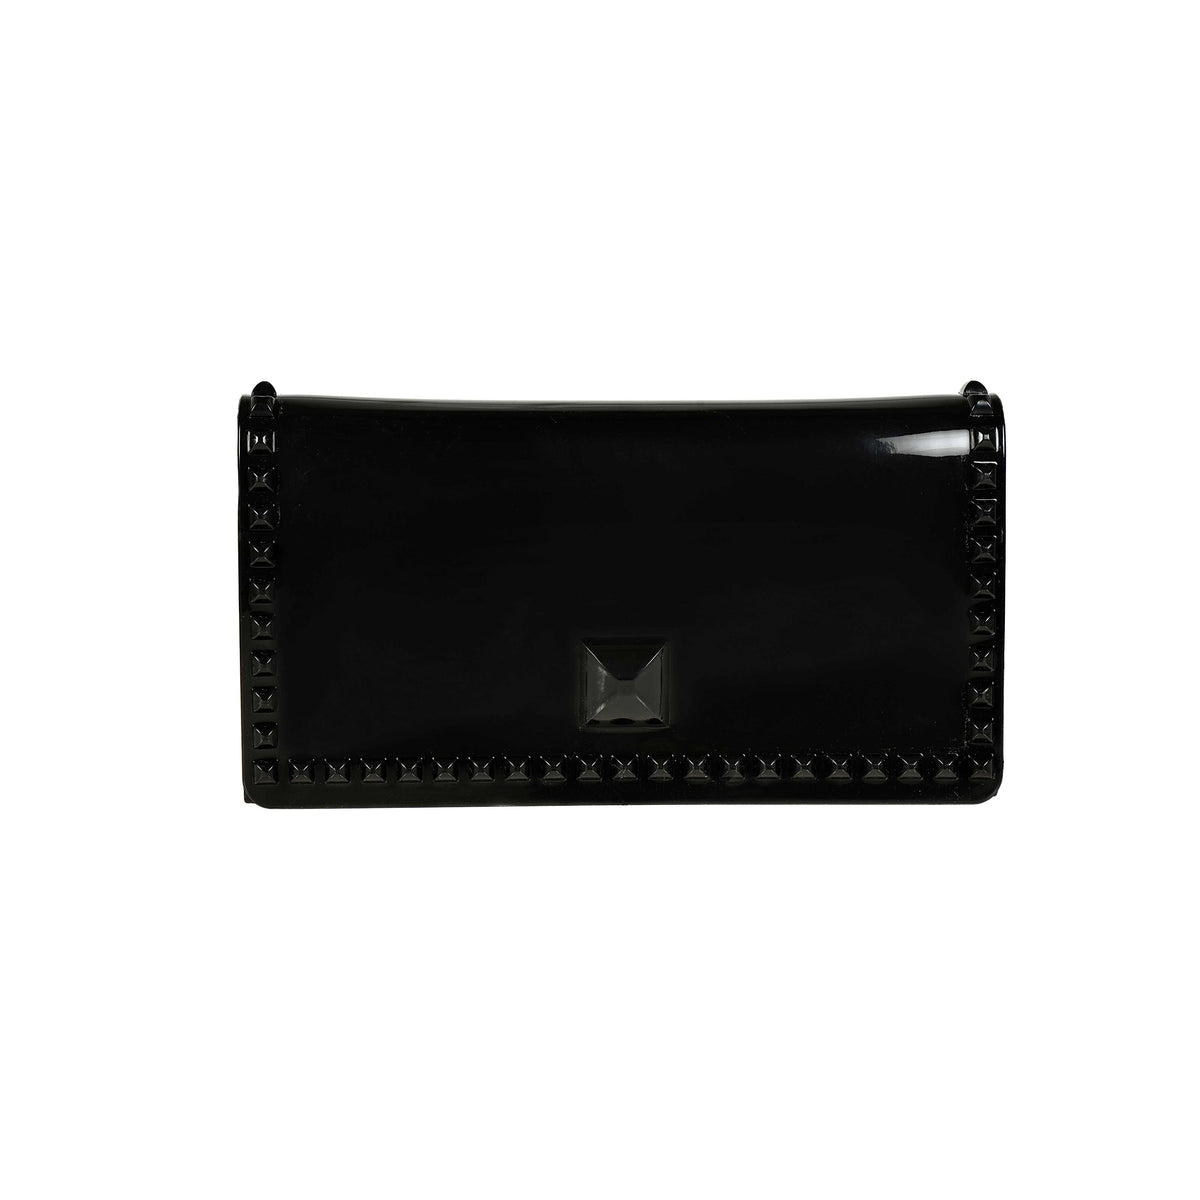 Black big purses with studs from Carmen Sol